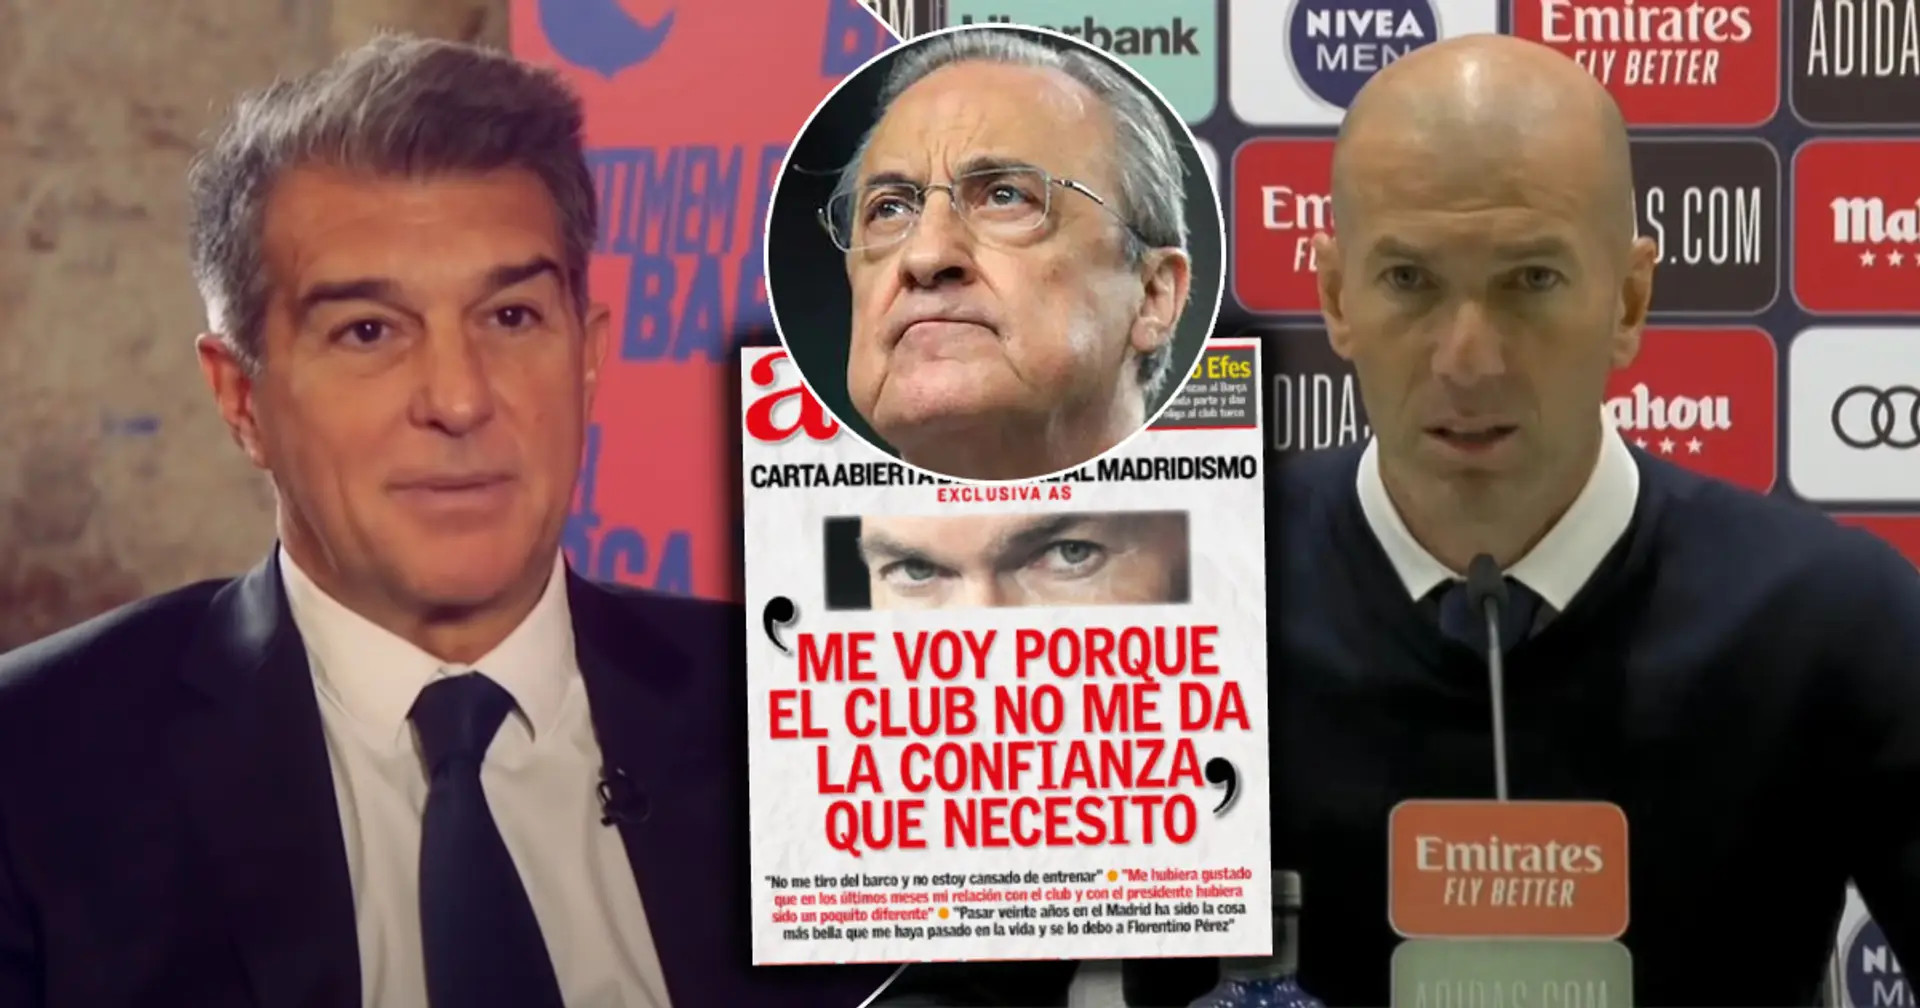 'I dread next season': Real Madrid fans preparing for worst after Zidane's letter against Florentino Perez